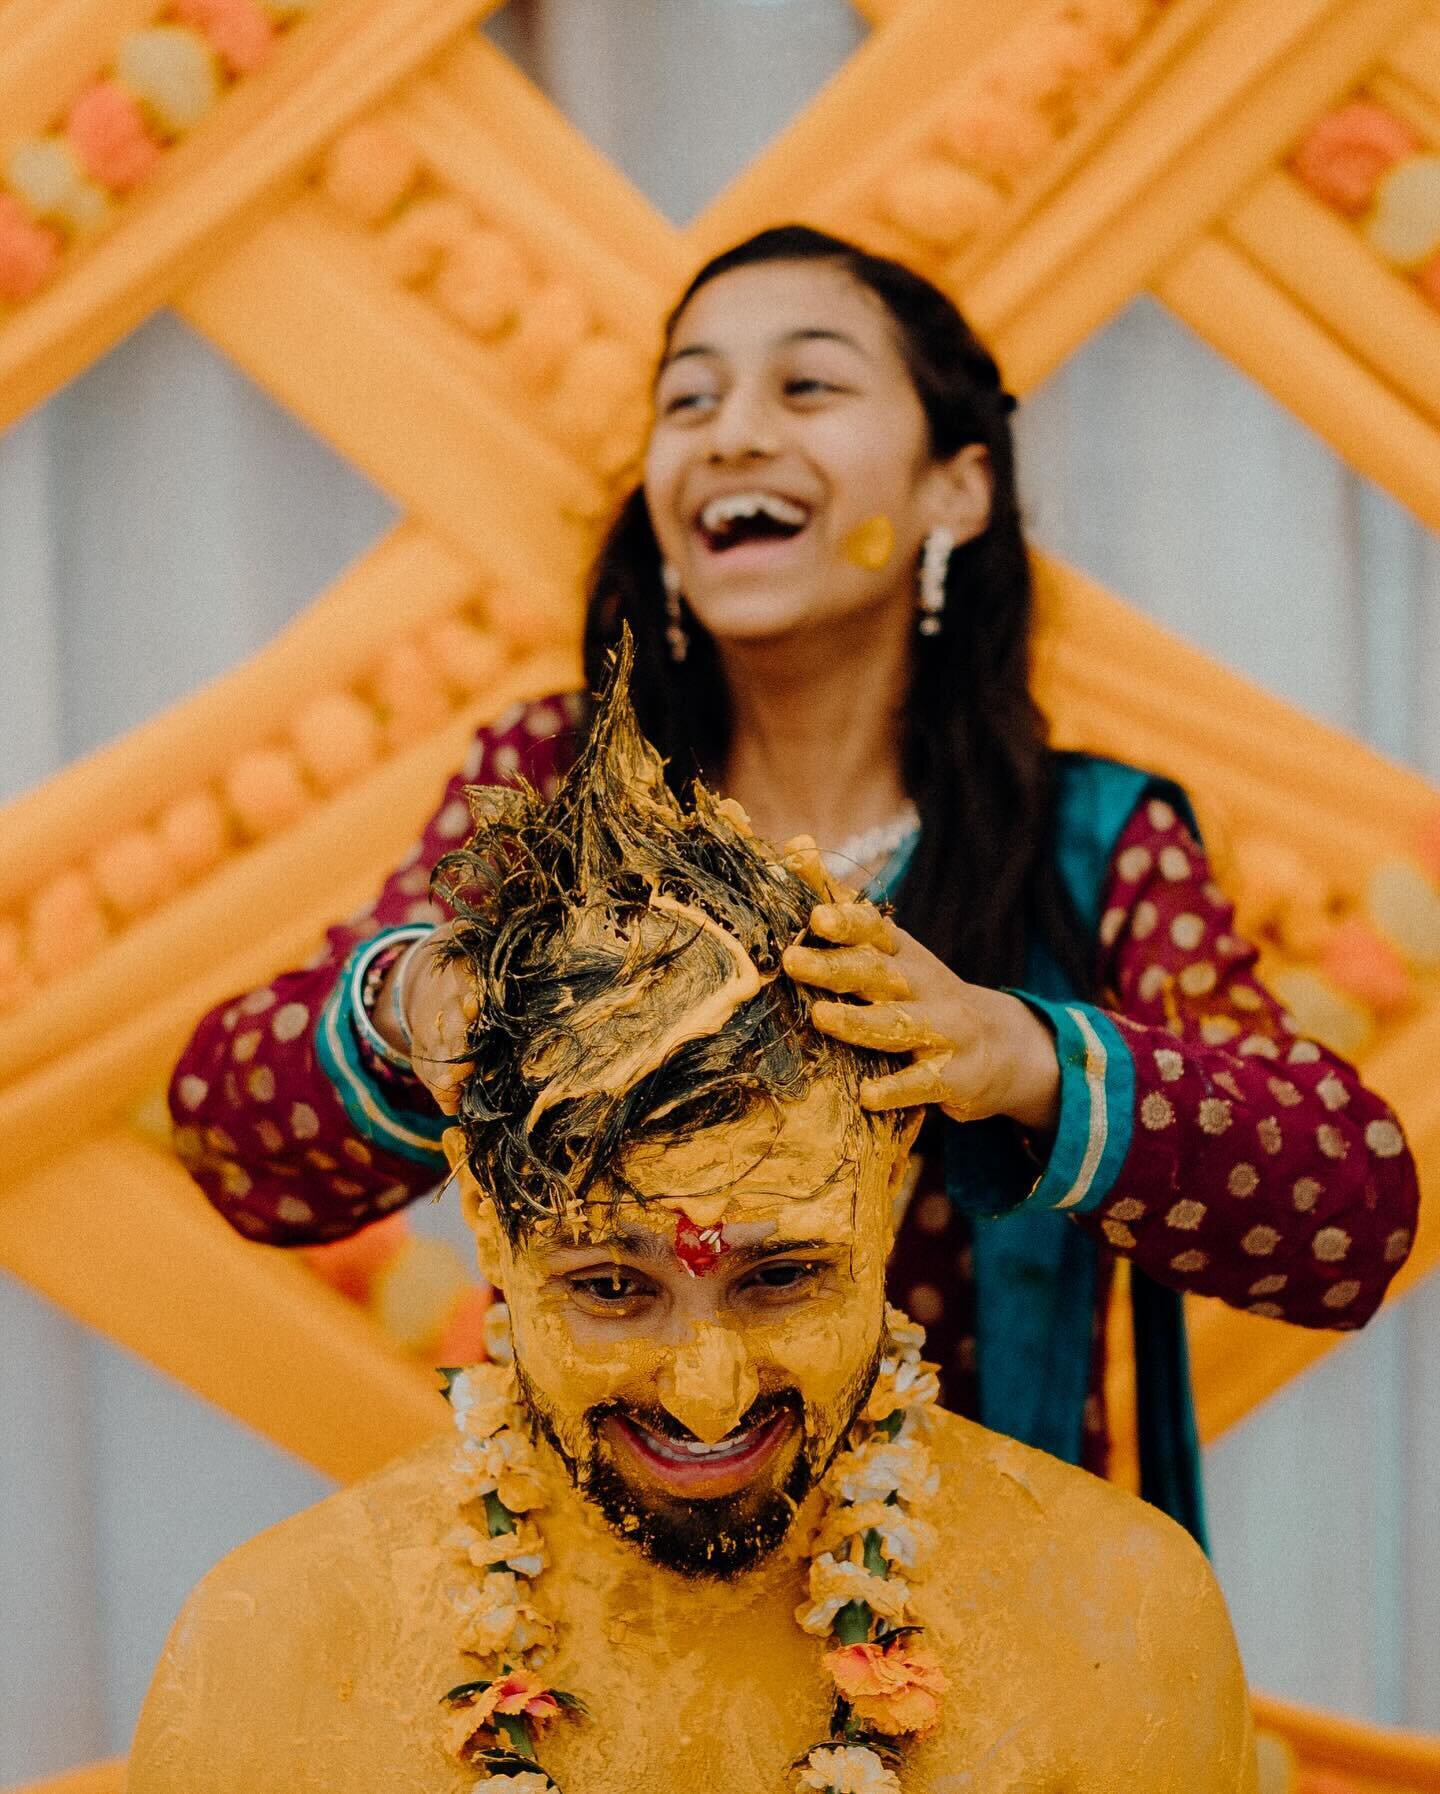 Get ready to laugh until your cheeks hurt, as we document every hilarious and heartwarming moment over at Nikhil&rsquo;s Pithi (Haldi). From the silly expressions to the heart touching emotions, we&rsquo;ll be there to freeze those timeless frames. I